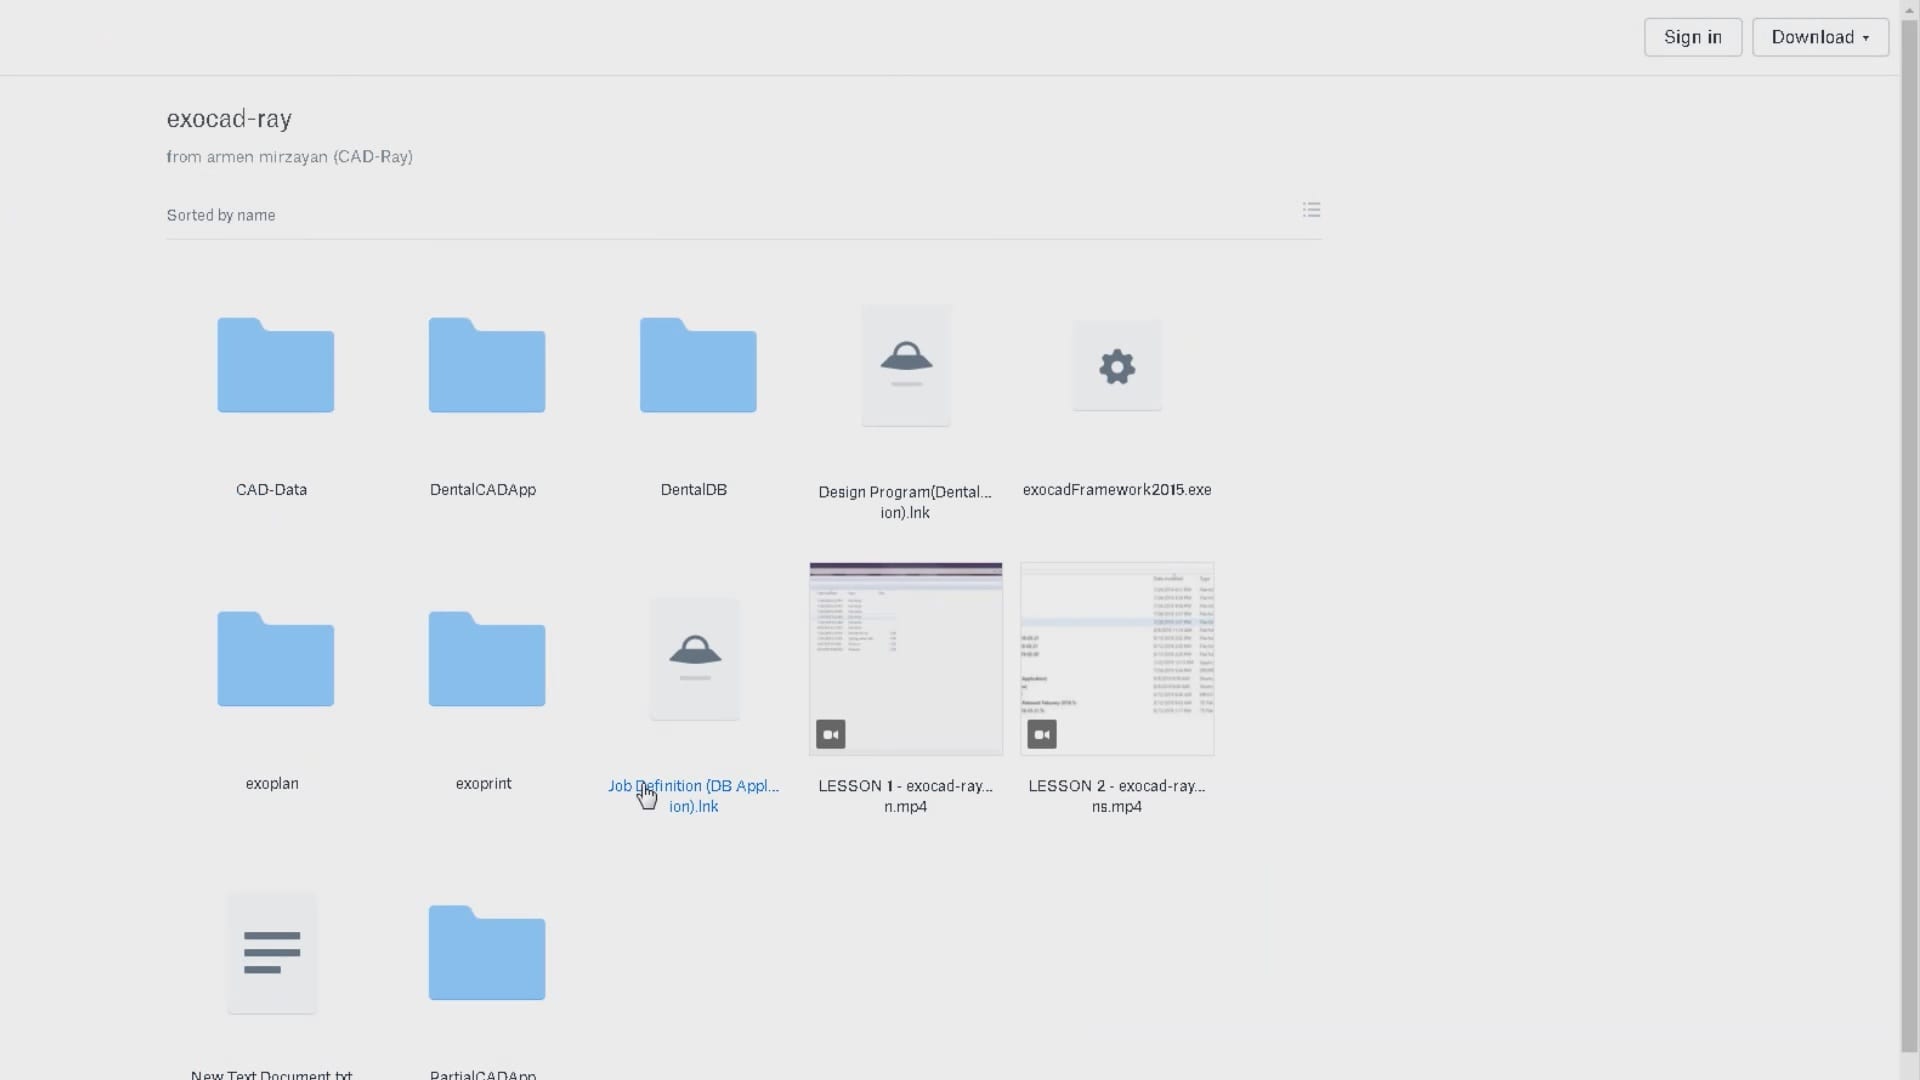 How to download dropbox and sync our program folder